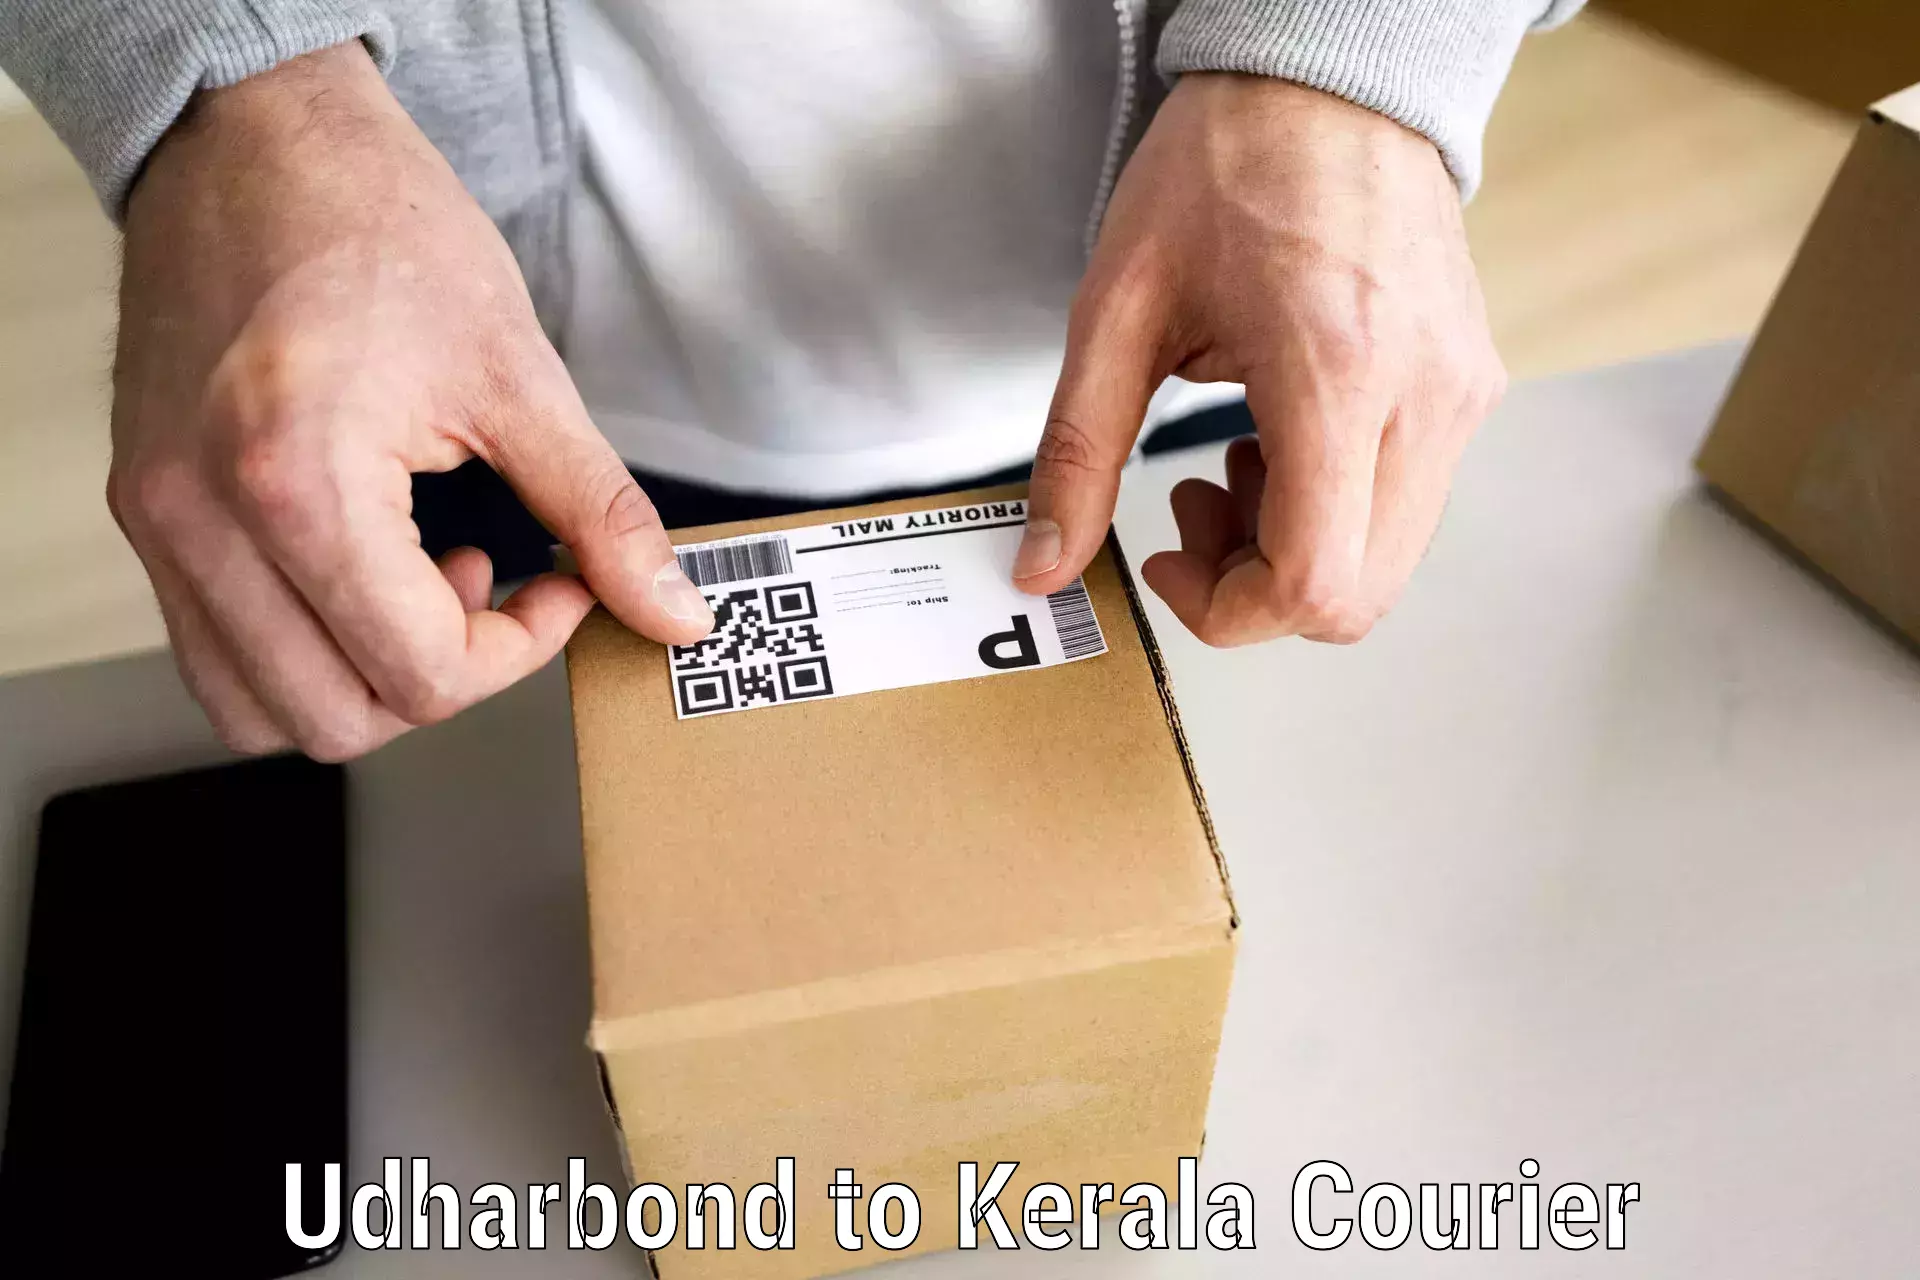 Household logistics services in Udharbond to Rajamudy